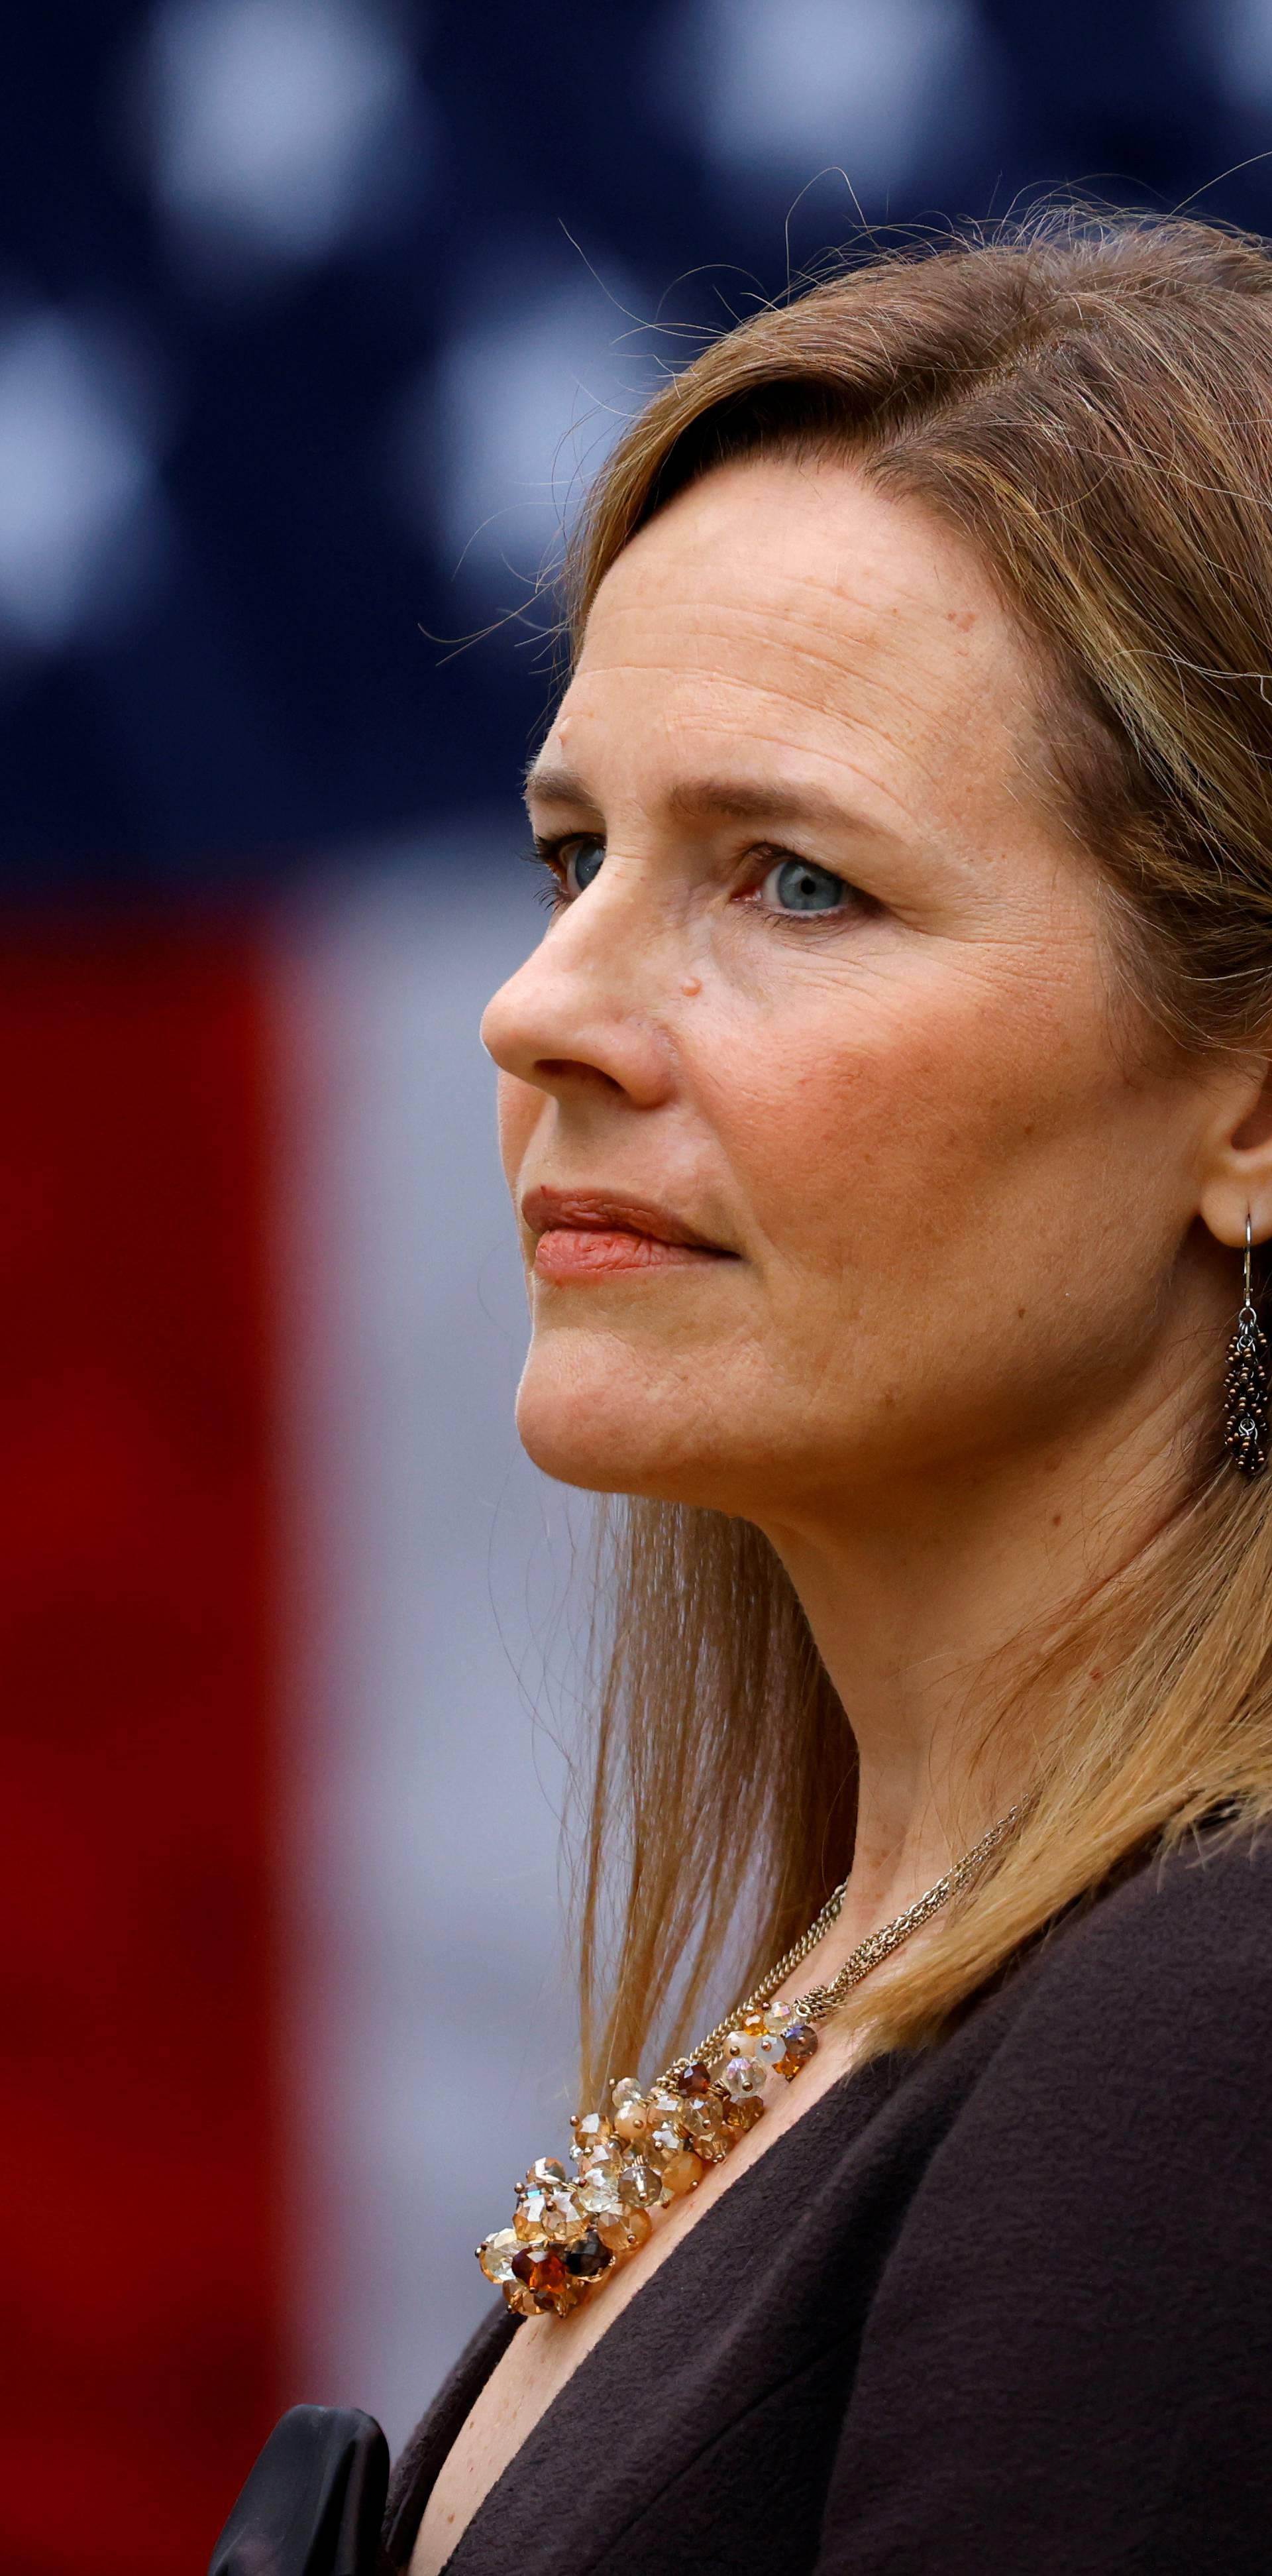 U.S. Court of Appeals for the Seventh Circuit Judge Amy Coney Barrett stands as U.S President Donald Trump holds an event to announce her nomination for the Supreme Court at the White House in Washington